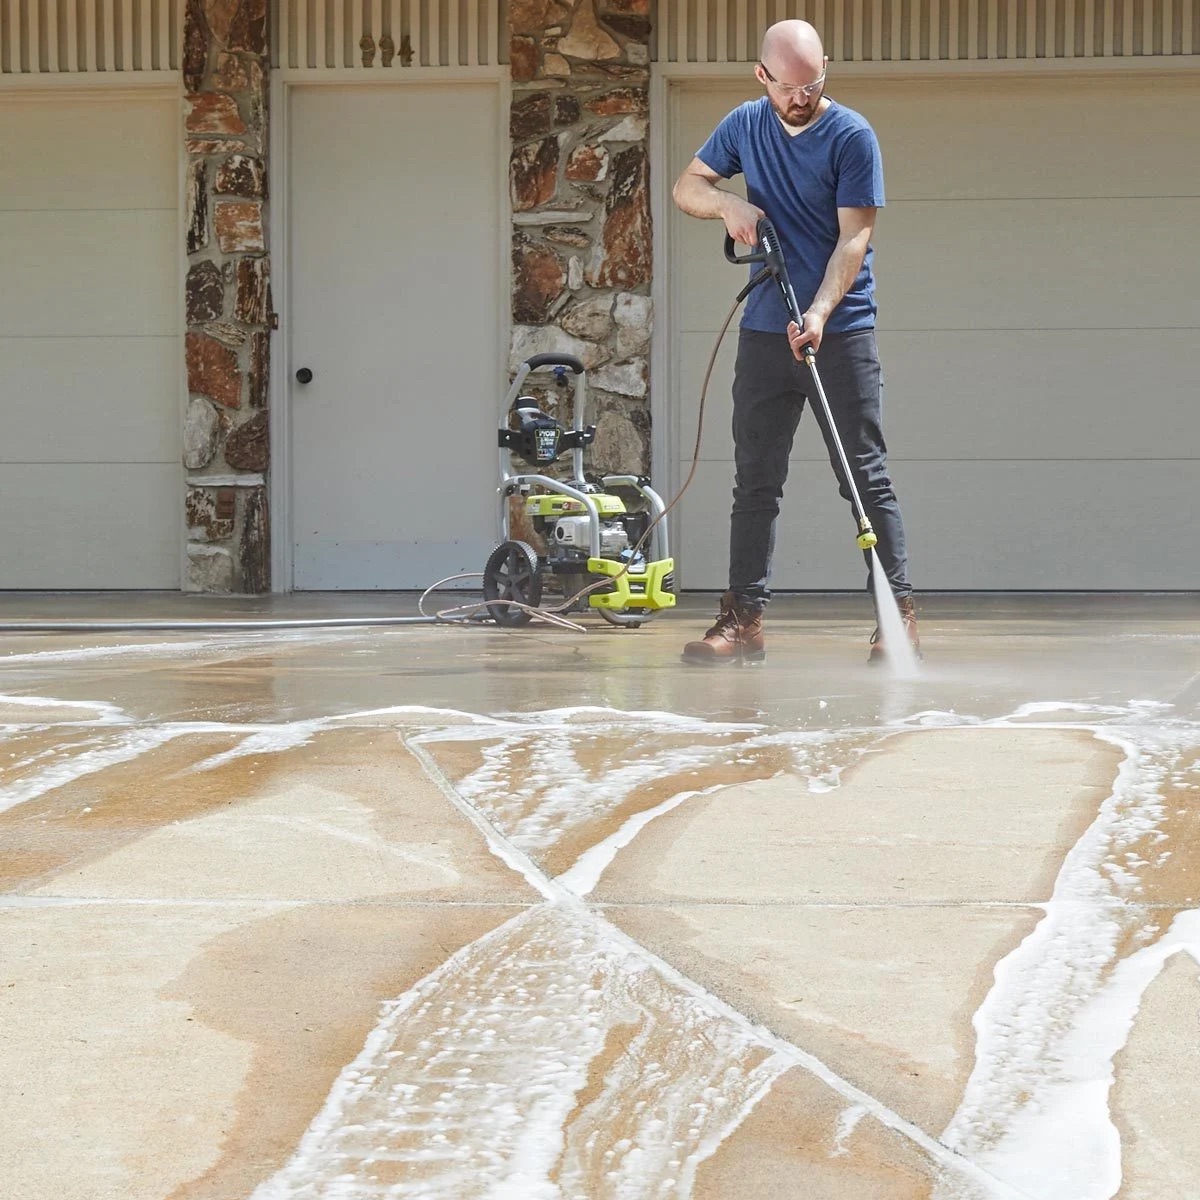 What Psi Pressure Washer To Clean Concrete?